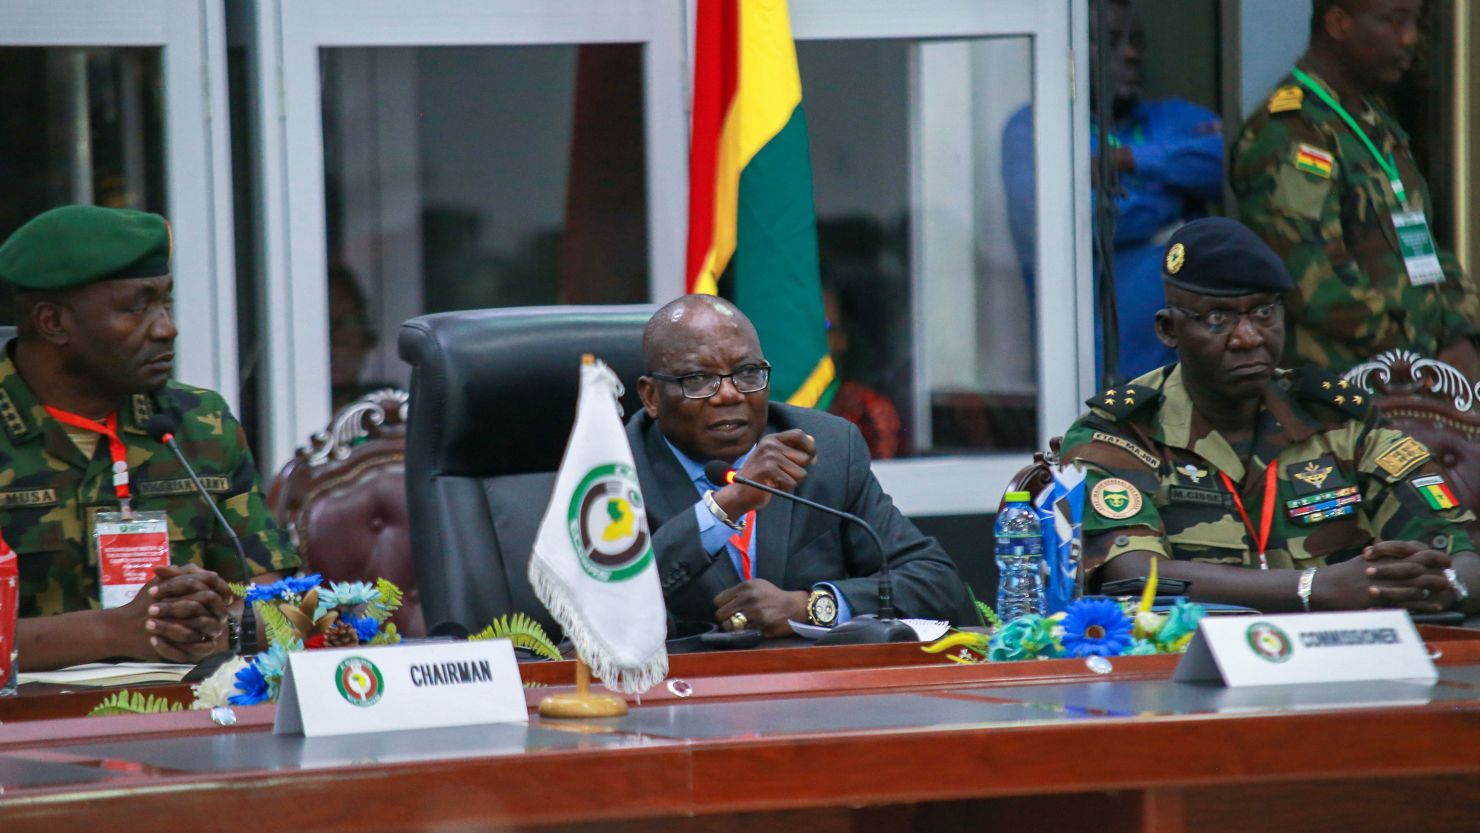 West African leaders have been meeting in the Ghanaian capital of Accra.